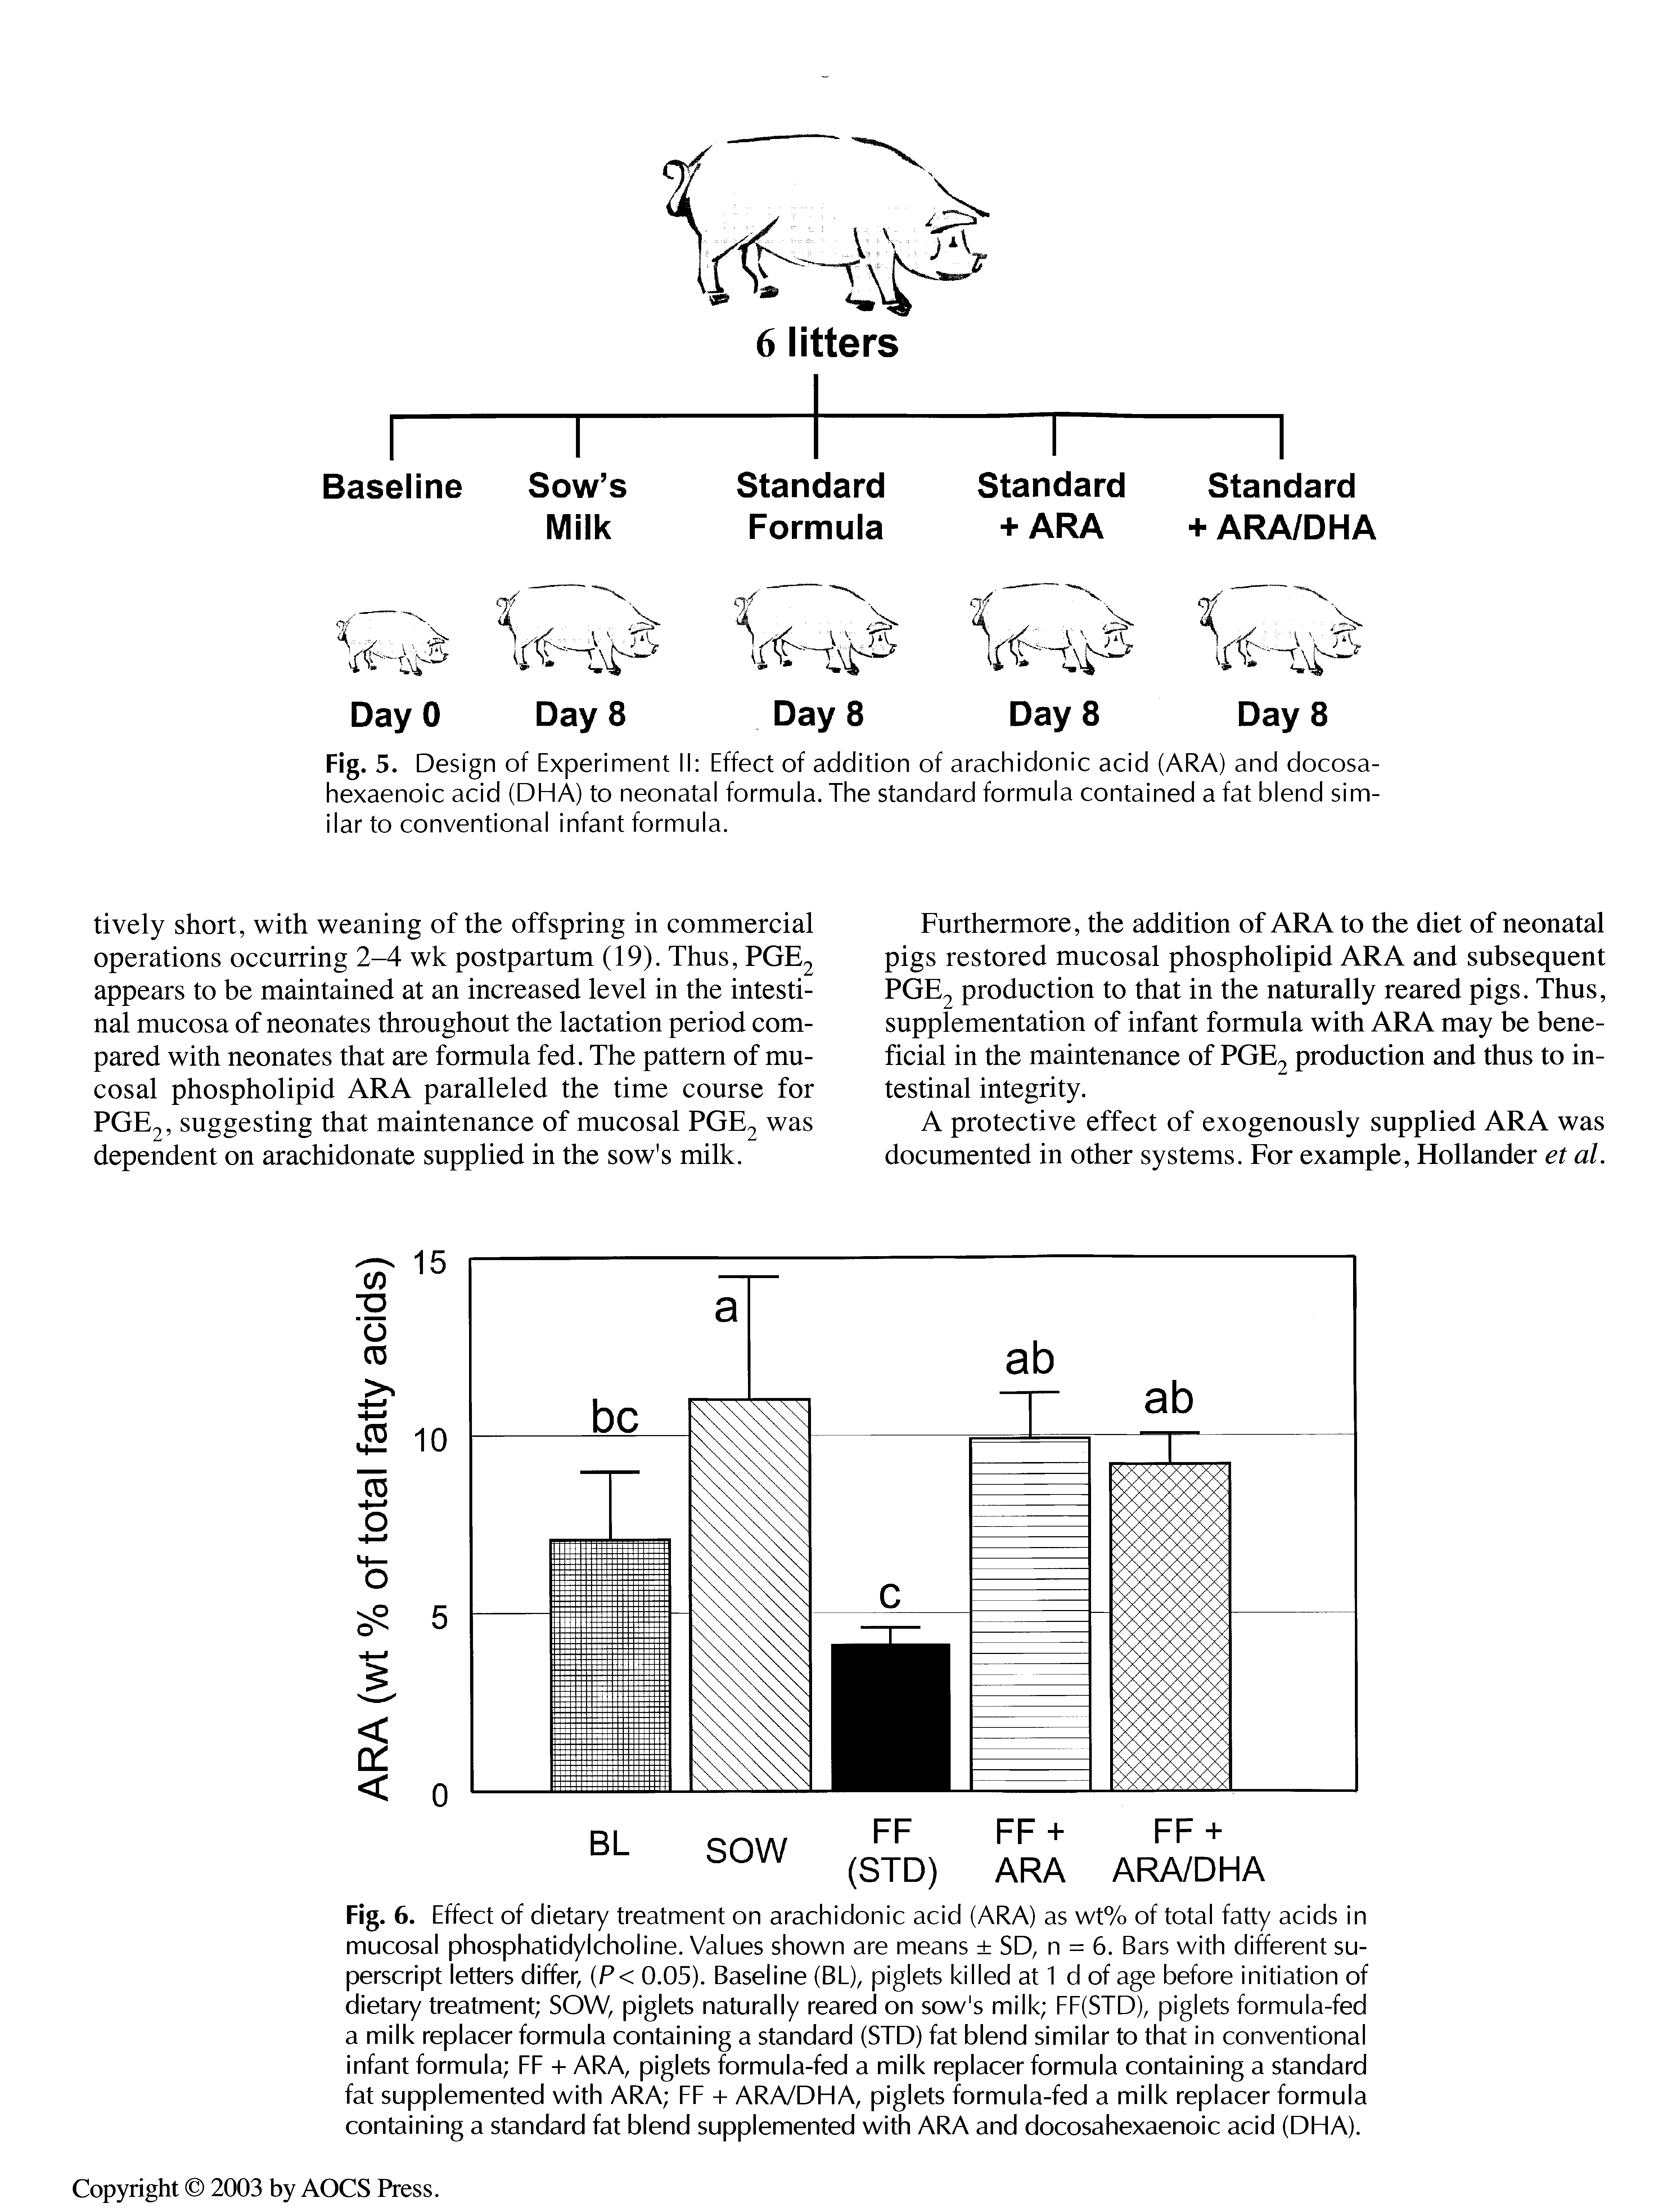 Fig. 6. Effect of dietary treatment on arachidonic acid (ARA) as wt% of total fatty acids in mucosal phosphatidylcholine. Values shown are means + SD, n = 6. Bars with different superscript letters differ, (P< 0.05). Baseline (BL), piglets killed at 1 d of age before initiation of dietary treatment SOW, piglets naturally reared on sow s milk FF(STD), piglets formula-fed a milk replacer formula containing a standard (STD) fat blend similar to that in conventional Infant formula FF + ARA, piglets formula-fed a milk replacer formula containing a standard fat supplemented with ARA FF + ARA/DHA, piglets formula-fed a milk replacer formula containing a standard fat blend supplemented with ARA and docosahexaenoic acid (DHA).